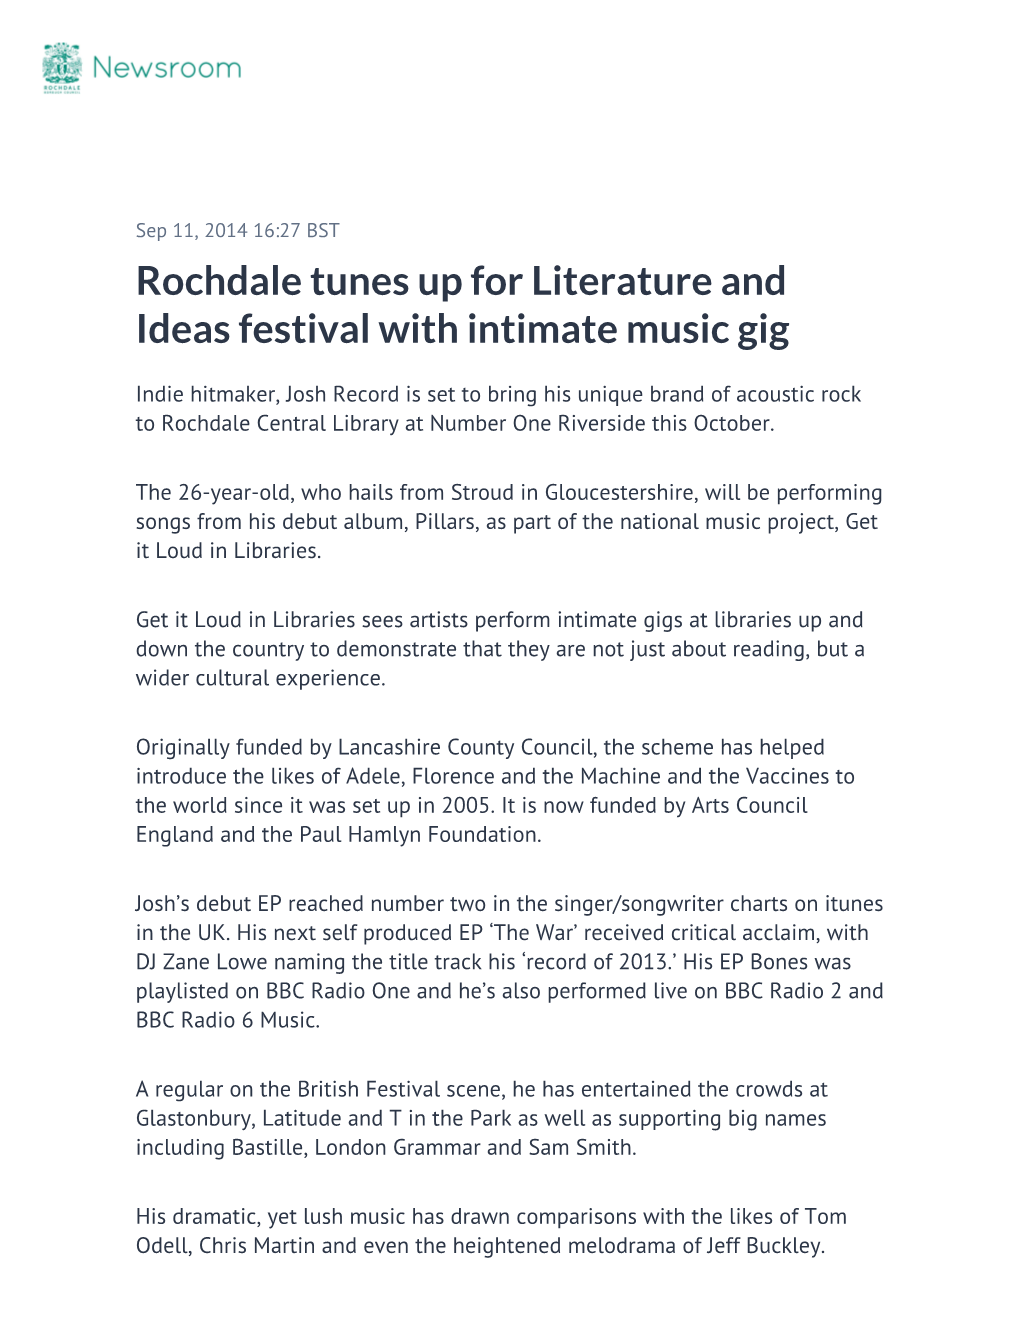 Rochdale Tunes up for Literature and Ideas Festival with Intimate Music Gig